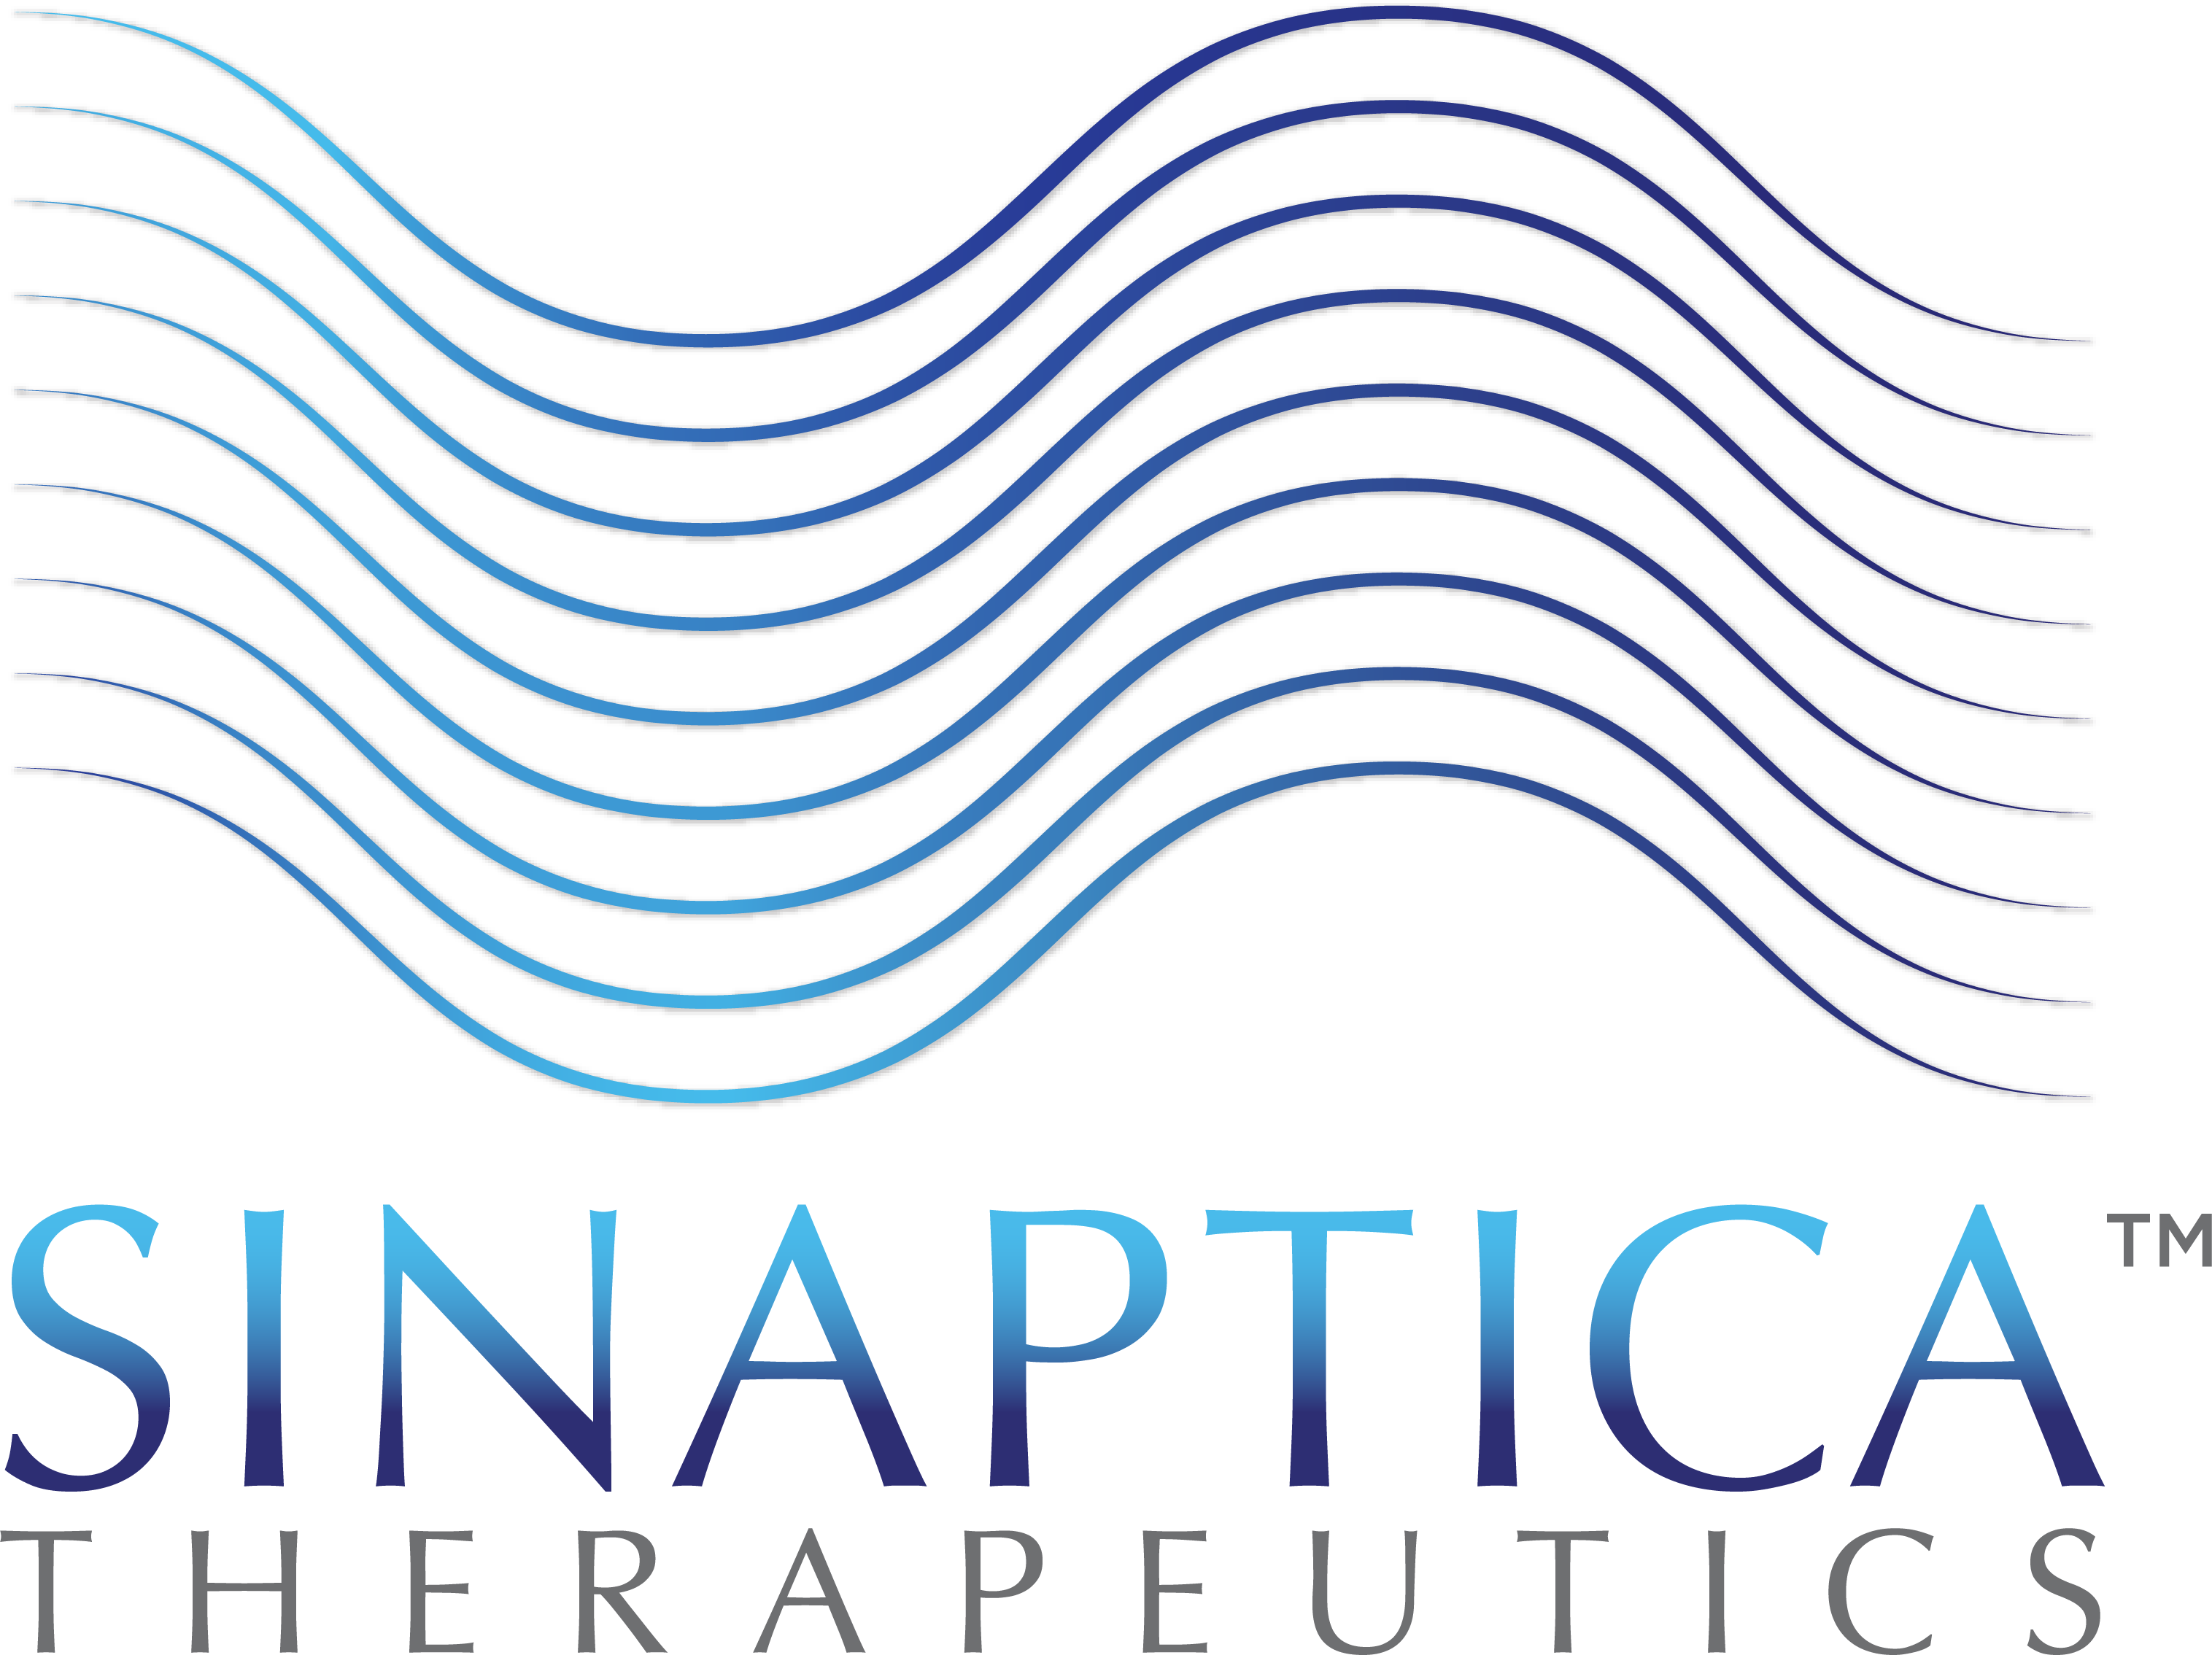 Sinaptica Therapeutics Announces Publication of Positive Results from Phase II Trial Evaluating the Potential of Precision-Delivered Noninvasive Neurostimulation Treatment for Mild-to-Moderate Alzheimer’s Disease